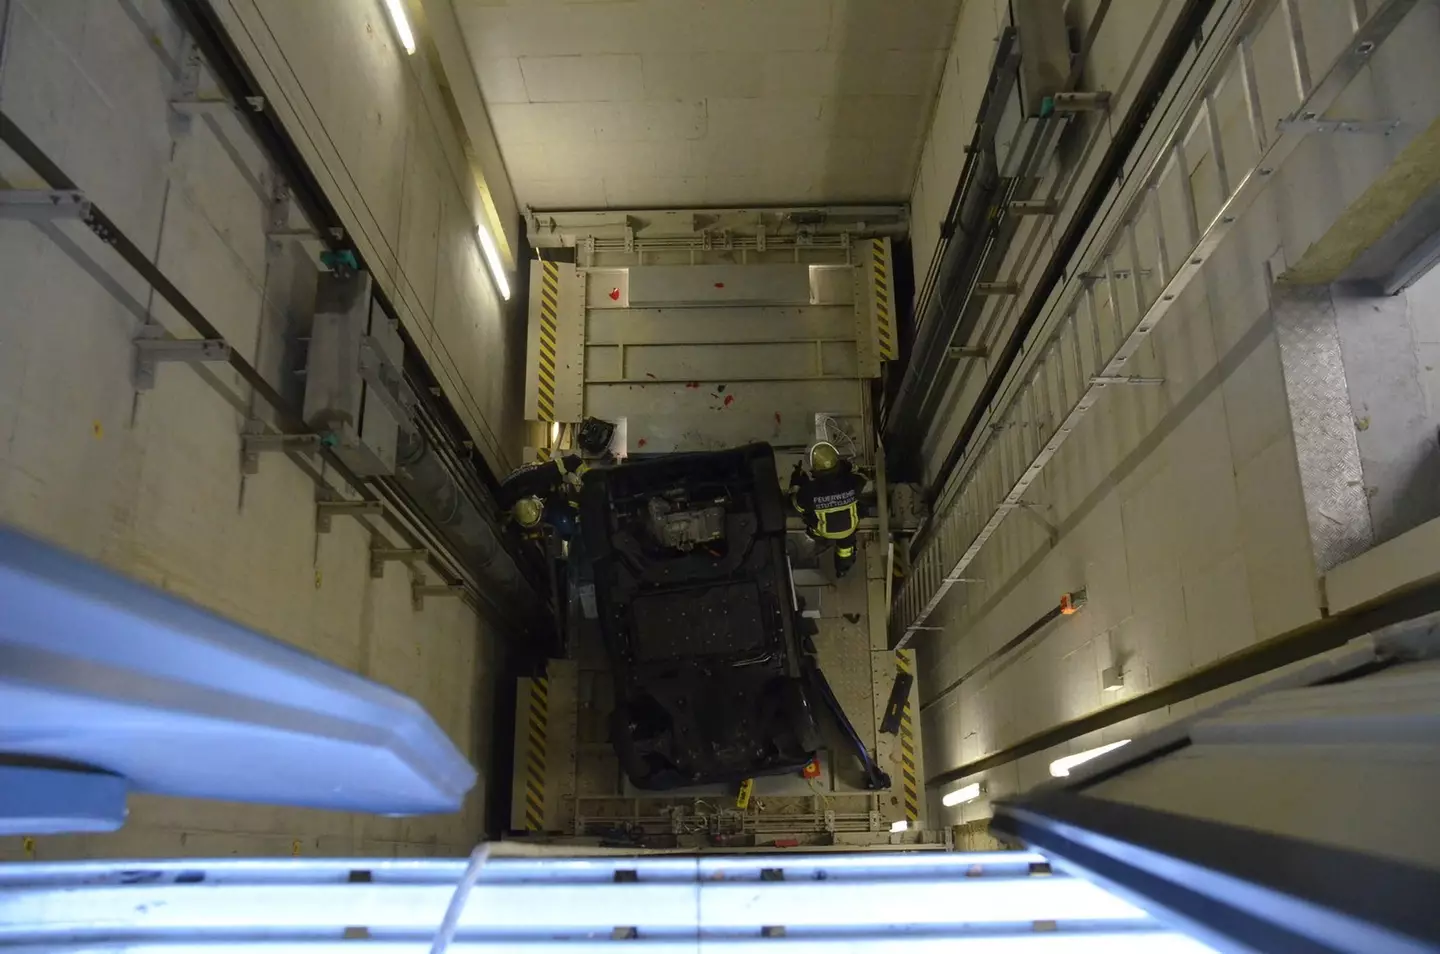 One woman apparently mistook a lift for a car parking spot in an underground car park.